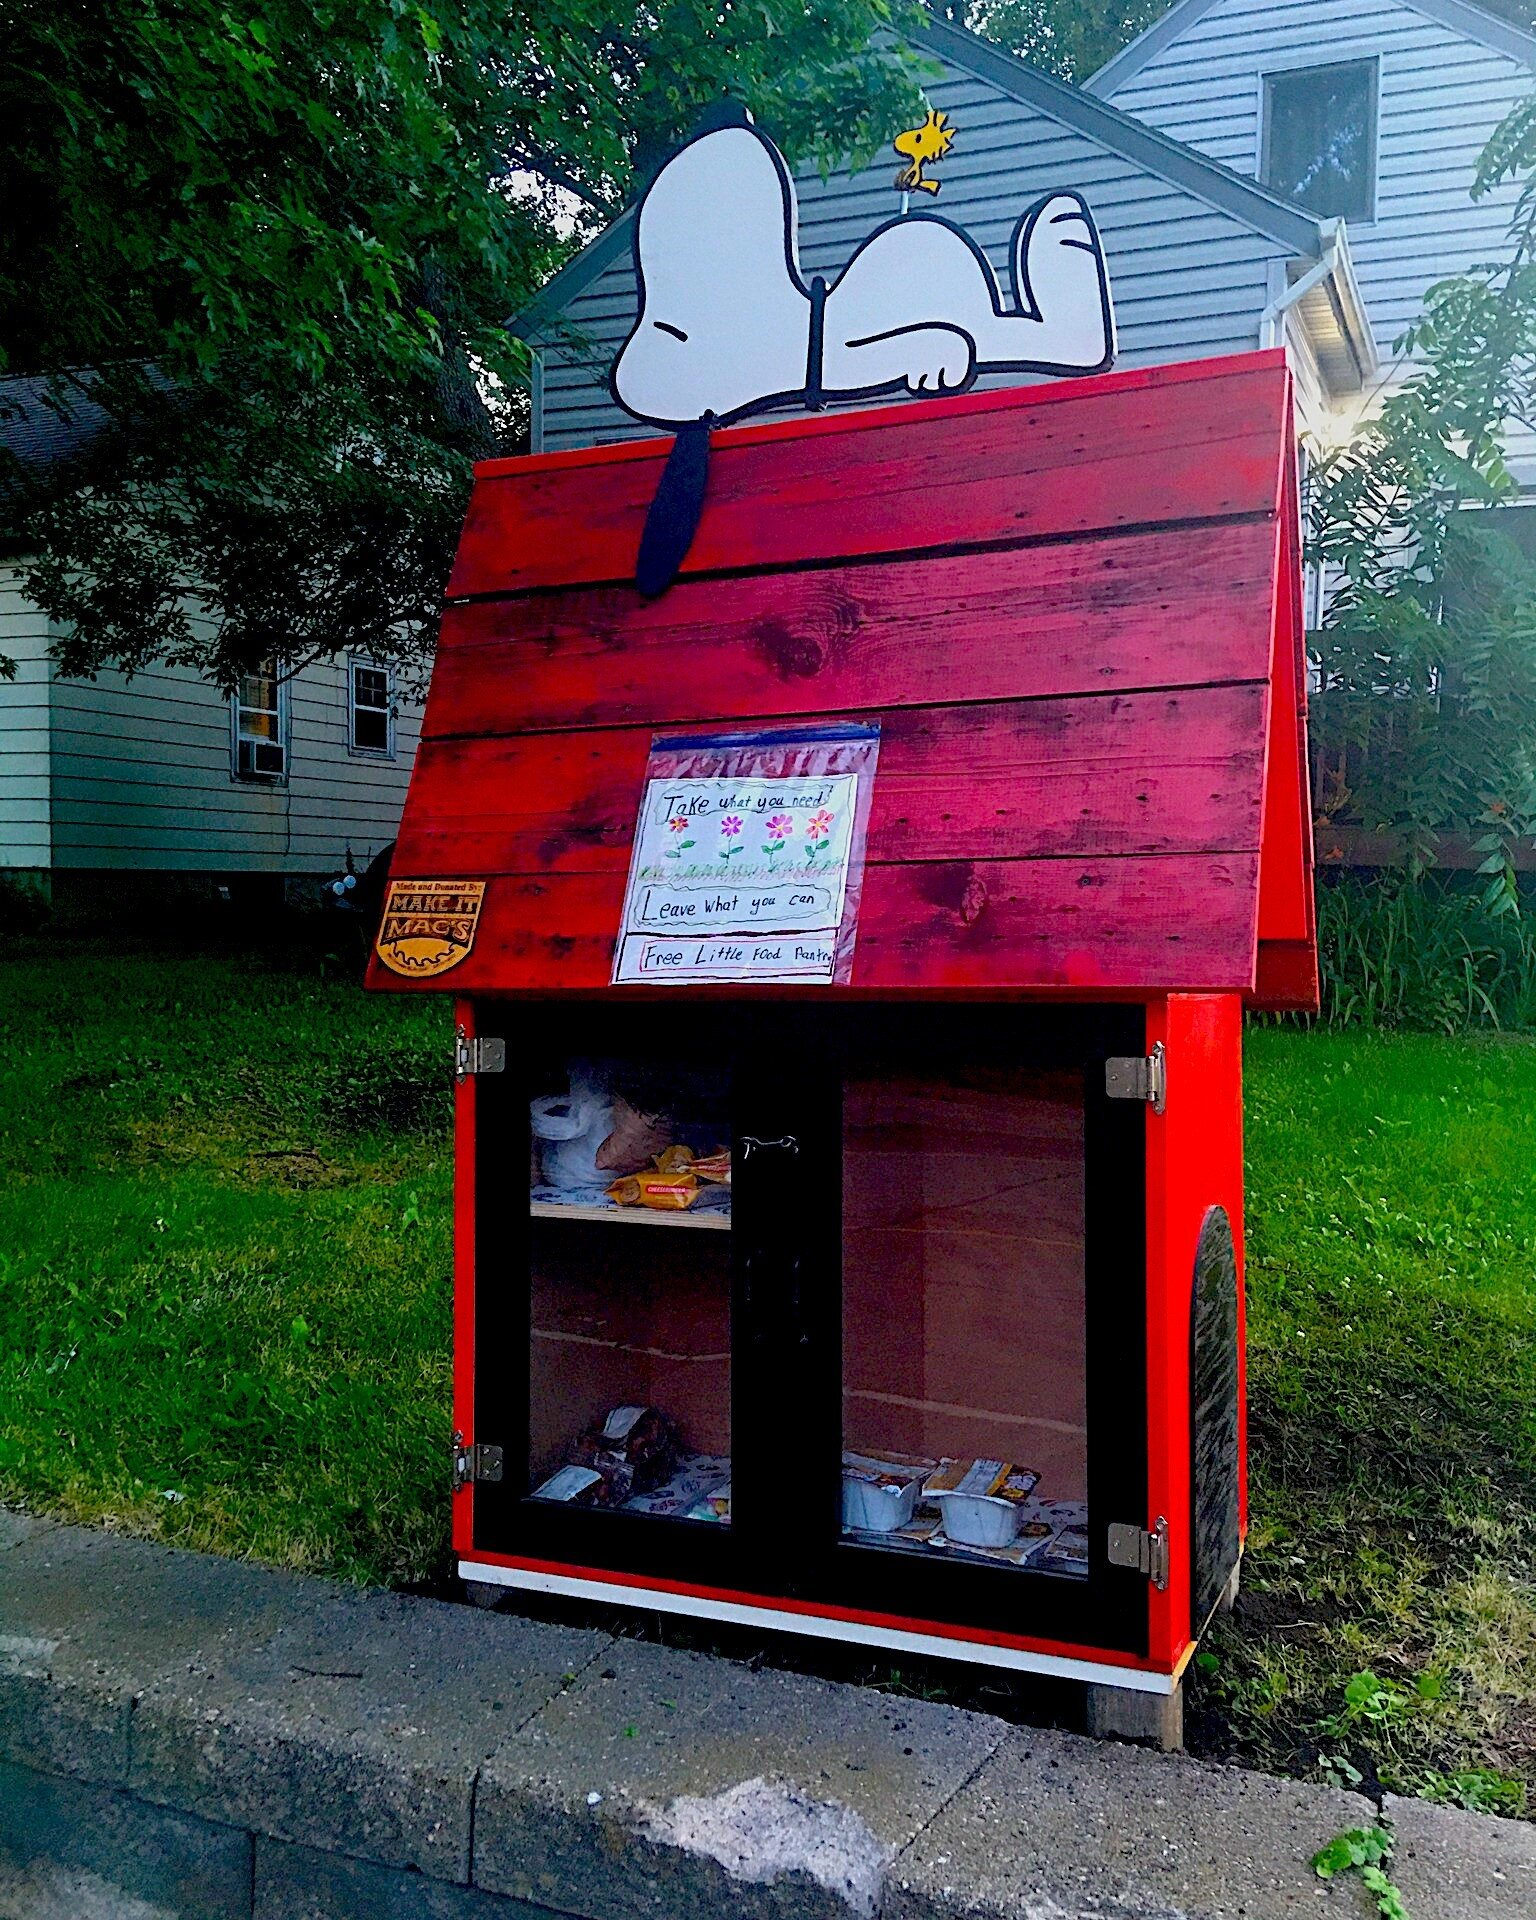 #ICYMI yesterday on TLFP's Facebook page...9th Ave S. Free Little Food Pantry in #stcloud 

#peanuts #snoopy #woodstock (#charlybrownchristmas is the best #christmasalbum) #minipantrymovement in #minnesota